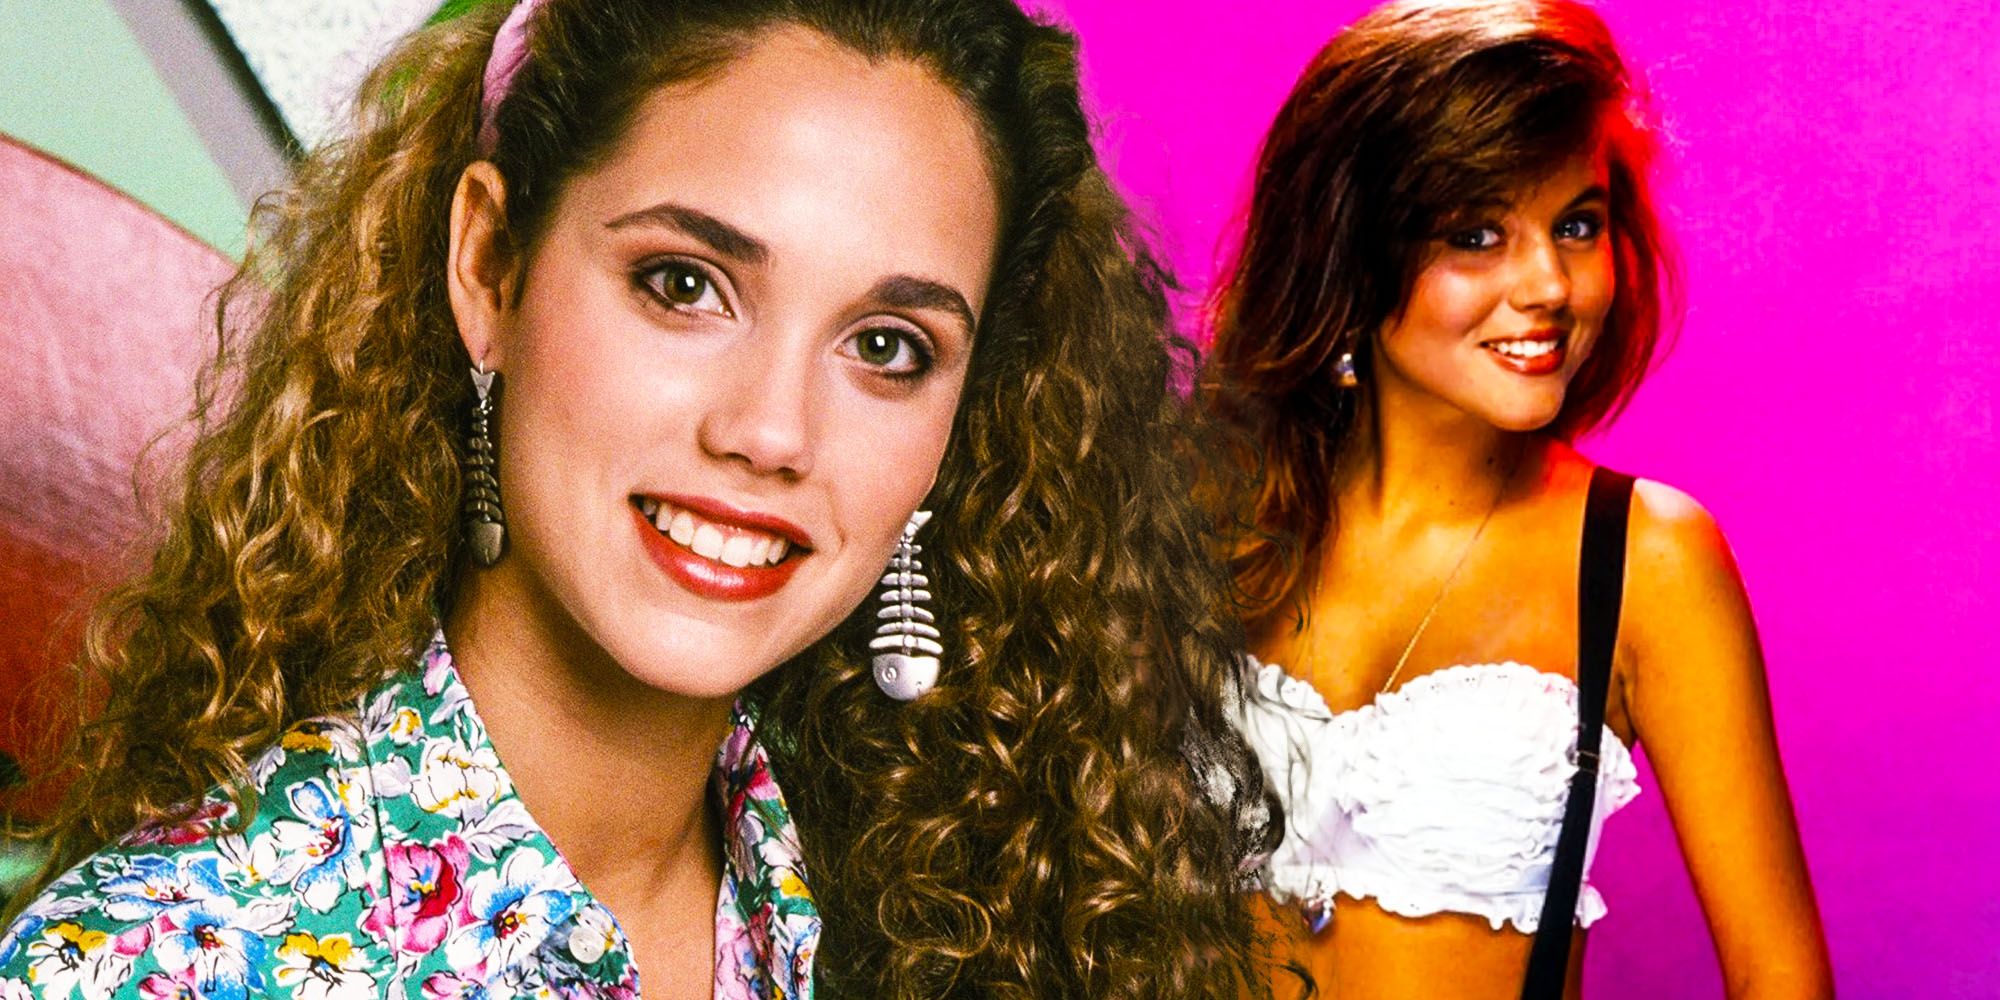 Saved by the bell Elizabeth Berkley Almost Played kelly